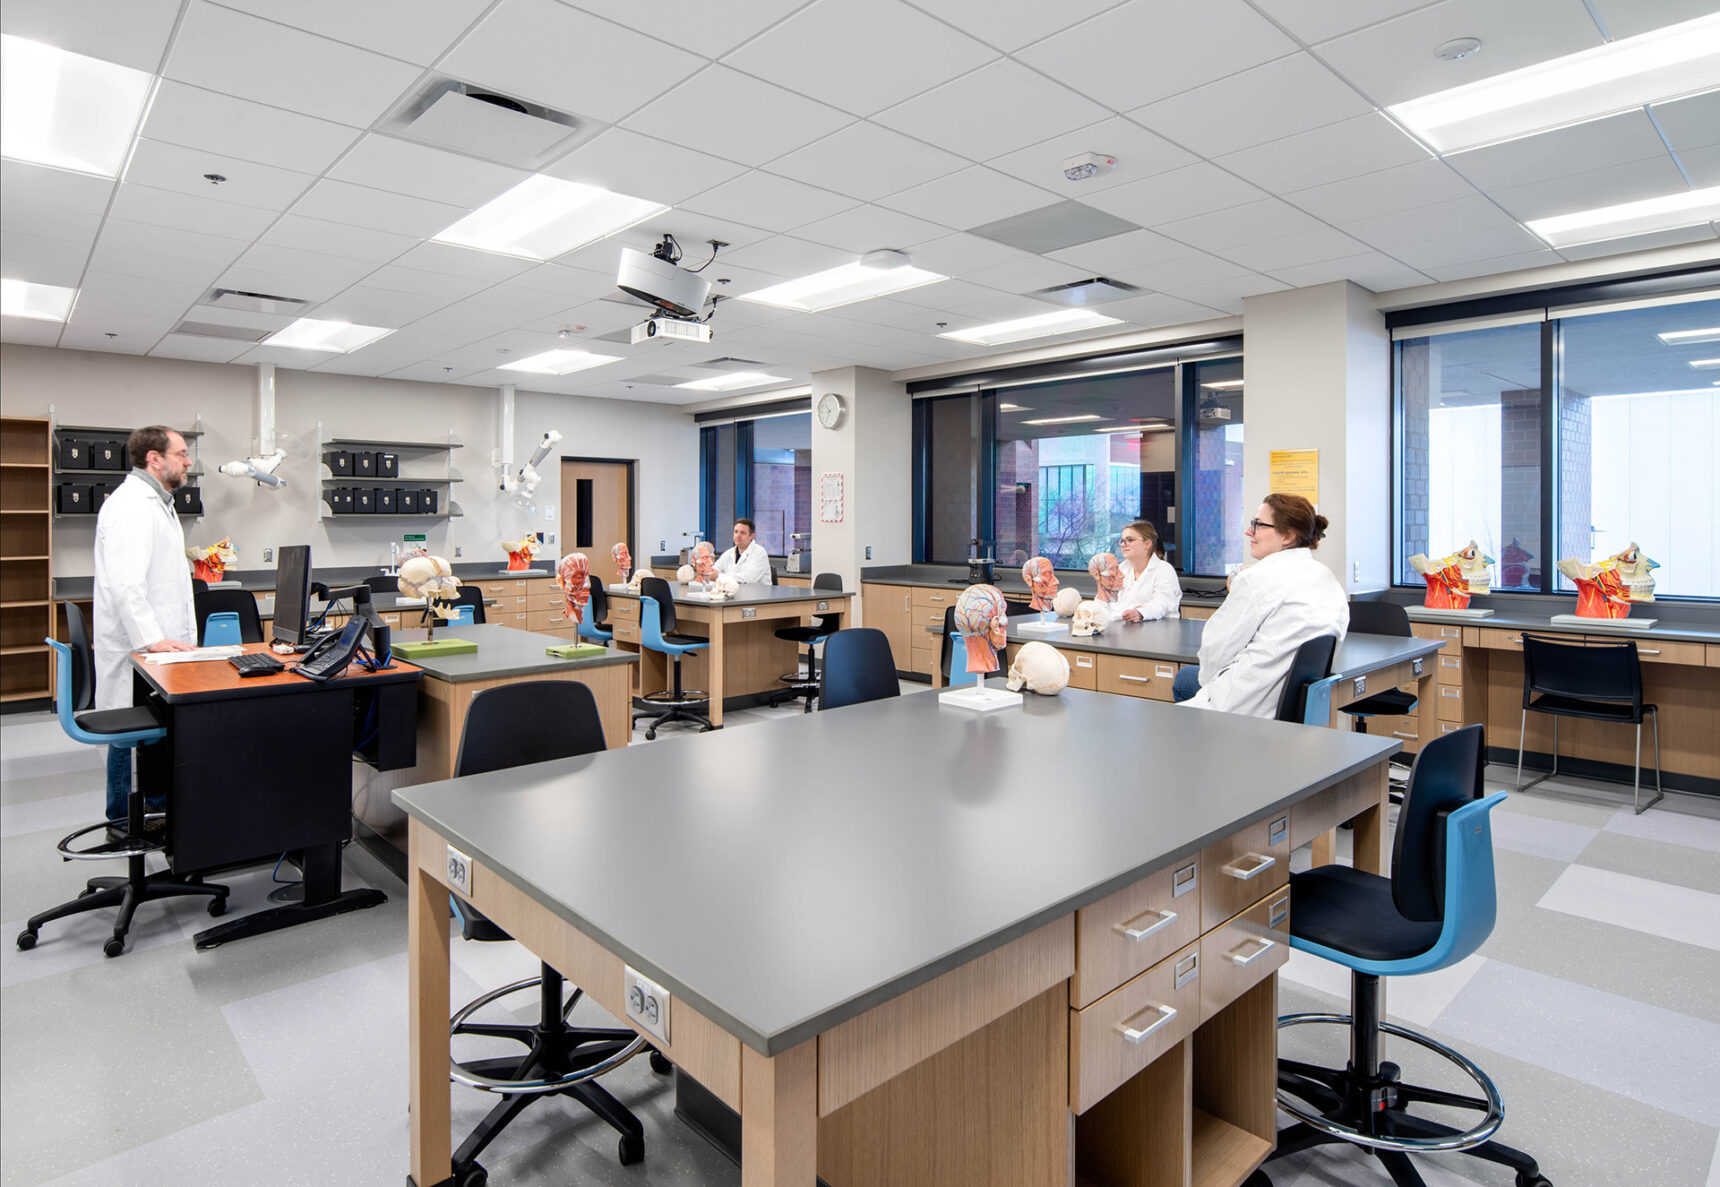 JCCC Science Laboratory Renovation and Additions